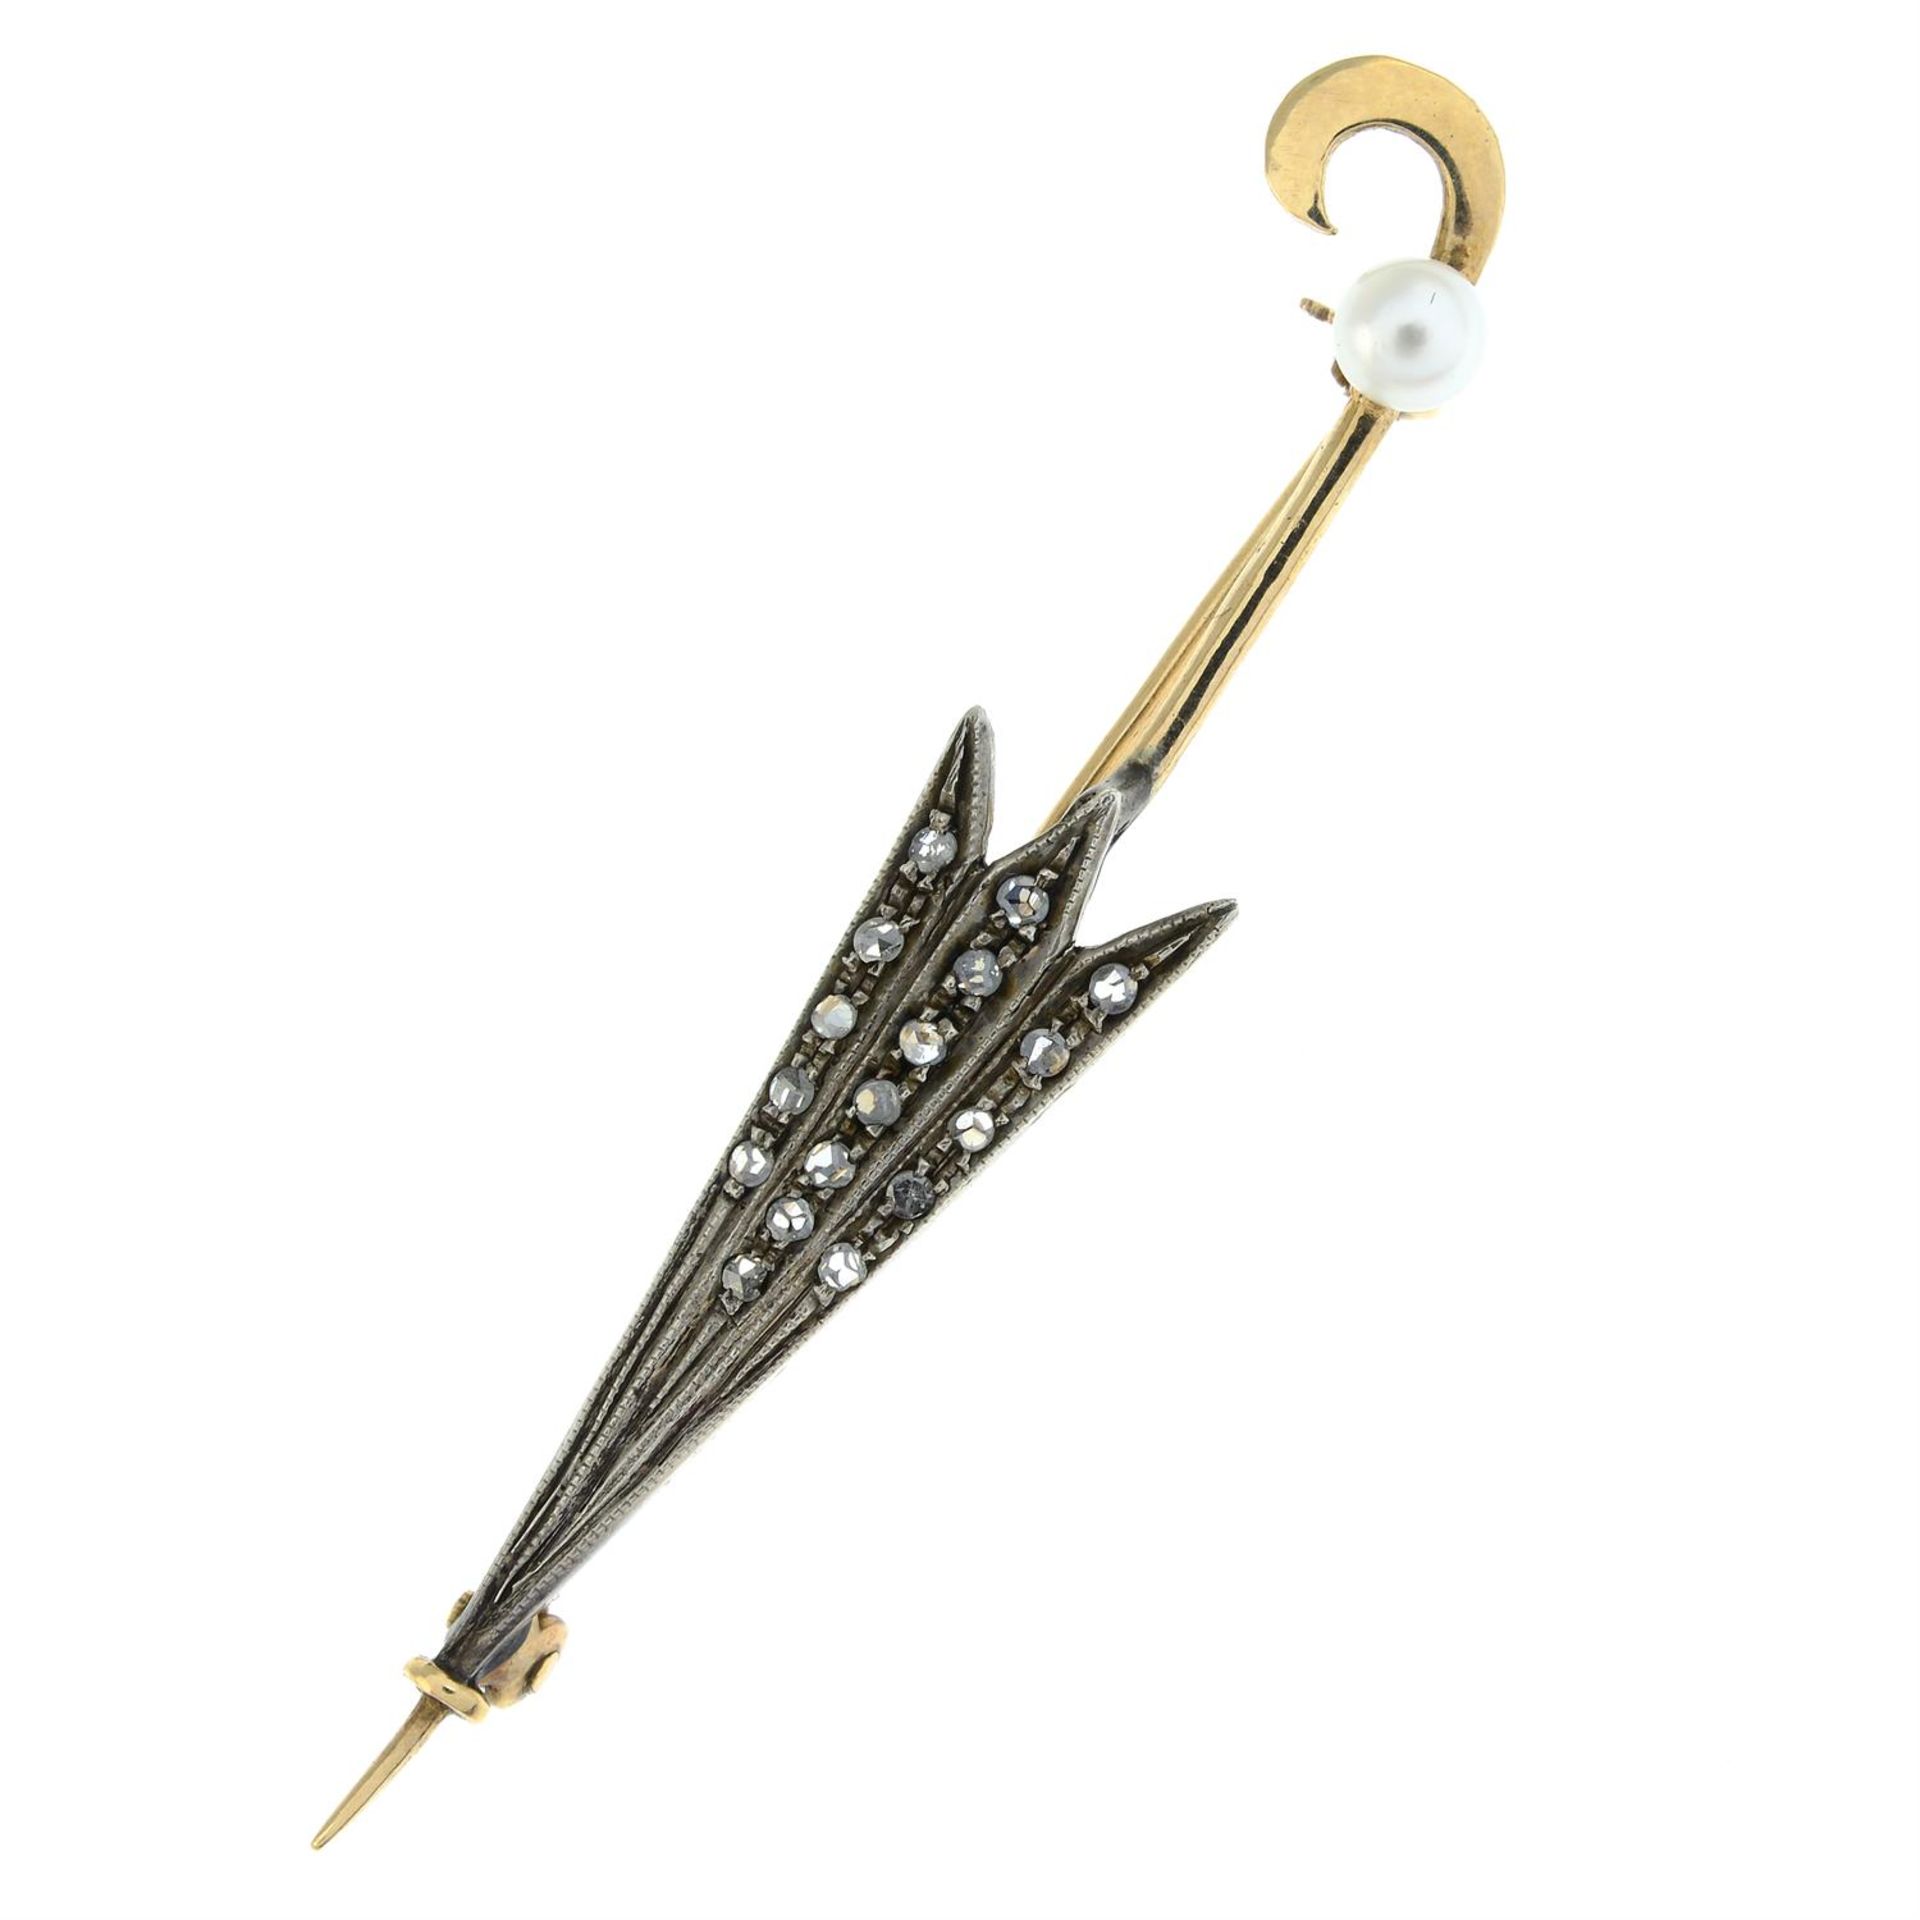 An early 20th century silver and gold, rose-cut diamond and seed pearl umbrella brooch.